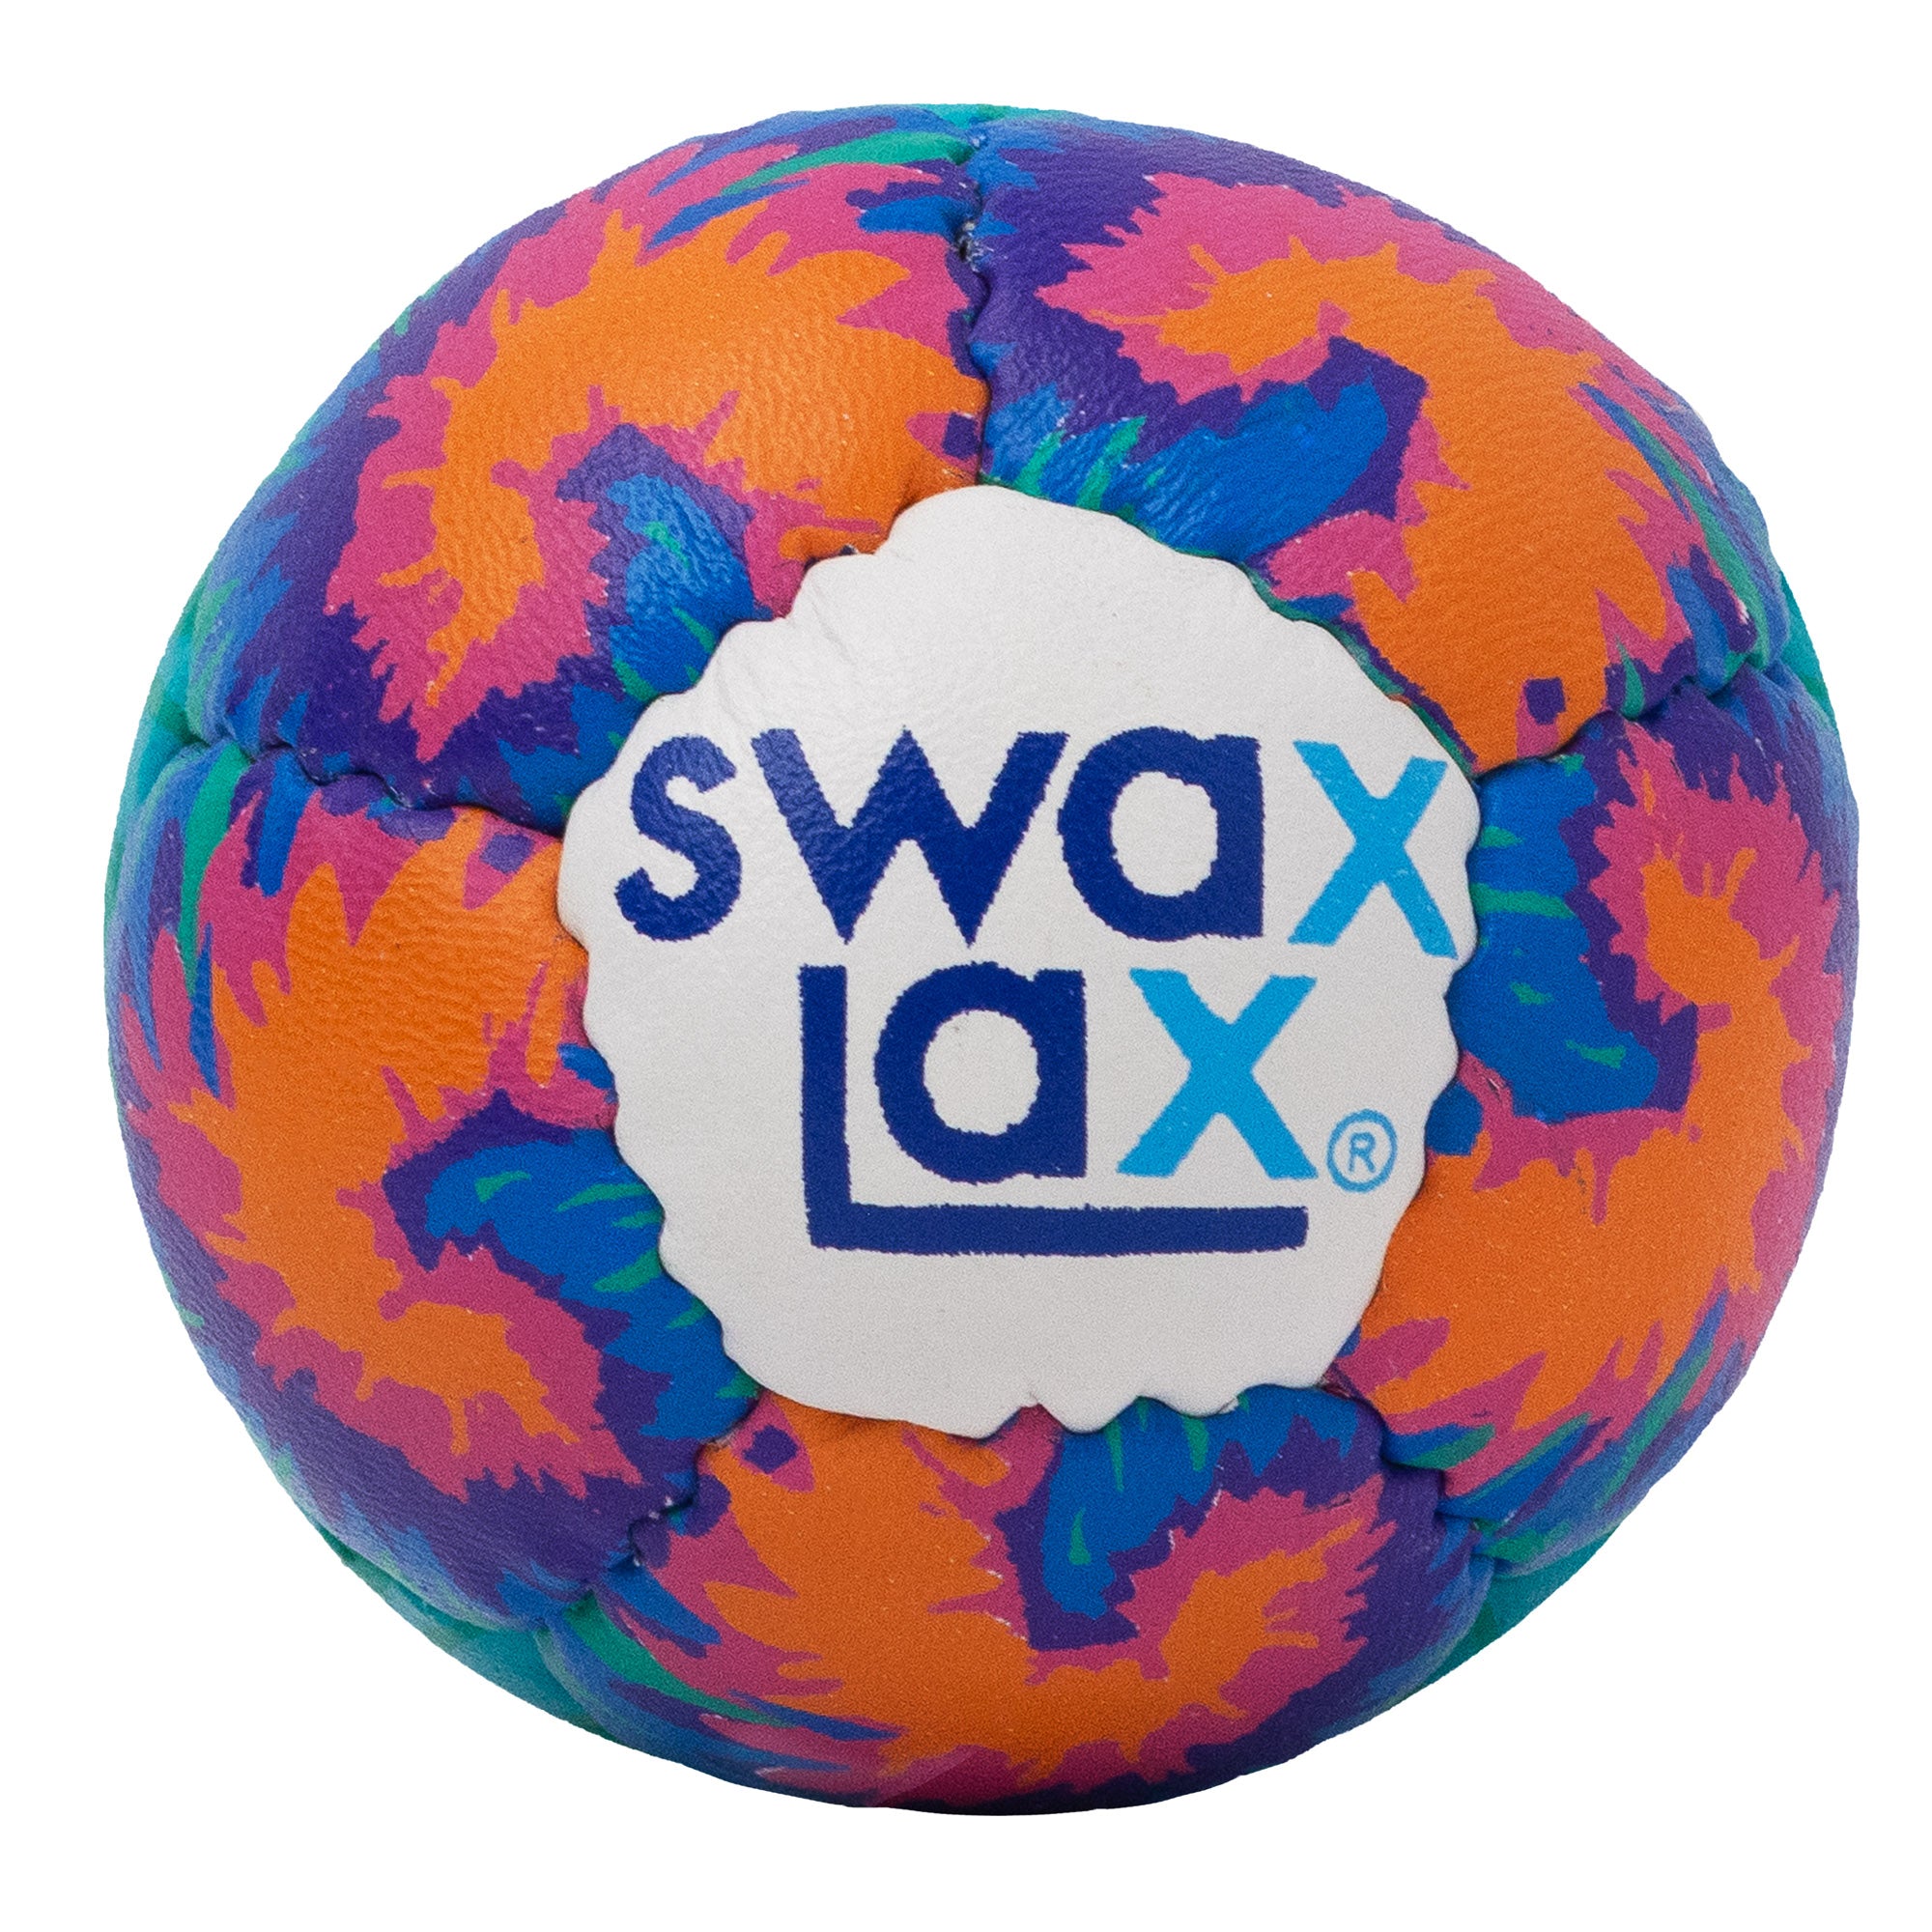 Maui Swax Lax Lacrosse training ball - front view